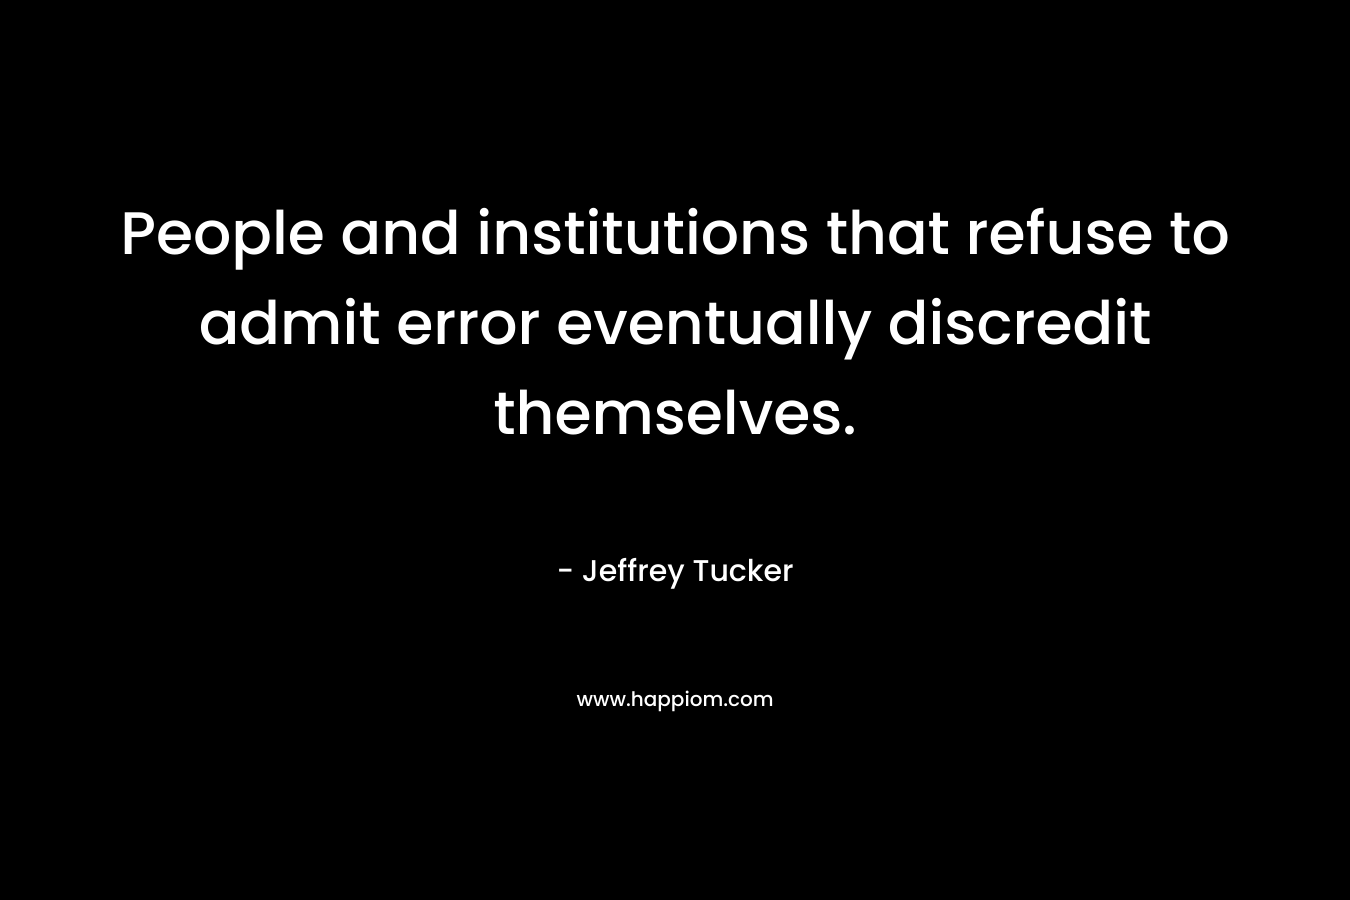 People and institutions that refuse to admit error eventually discredit themselves. – Jeffrey Tucker